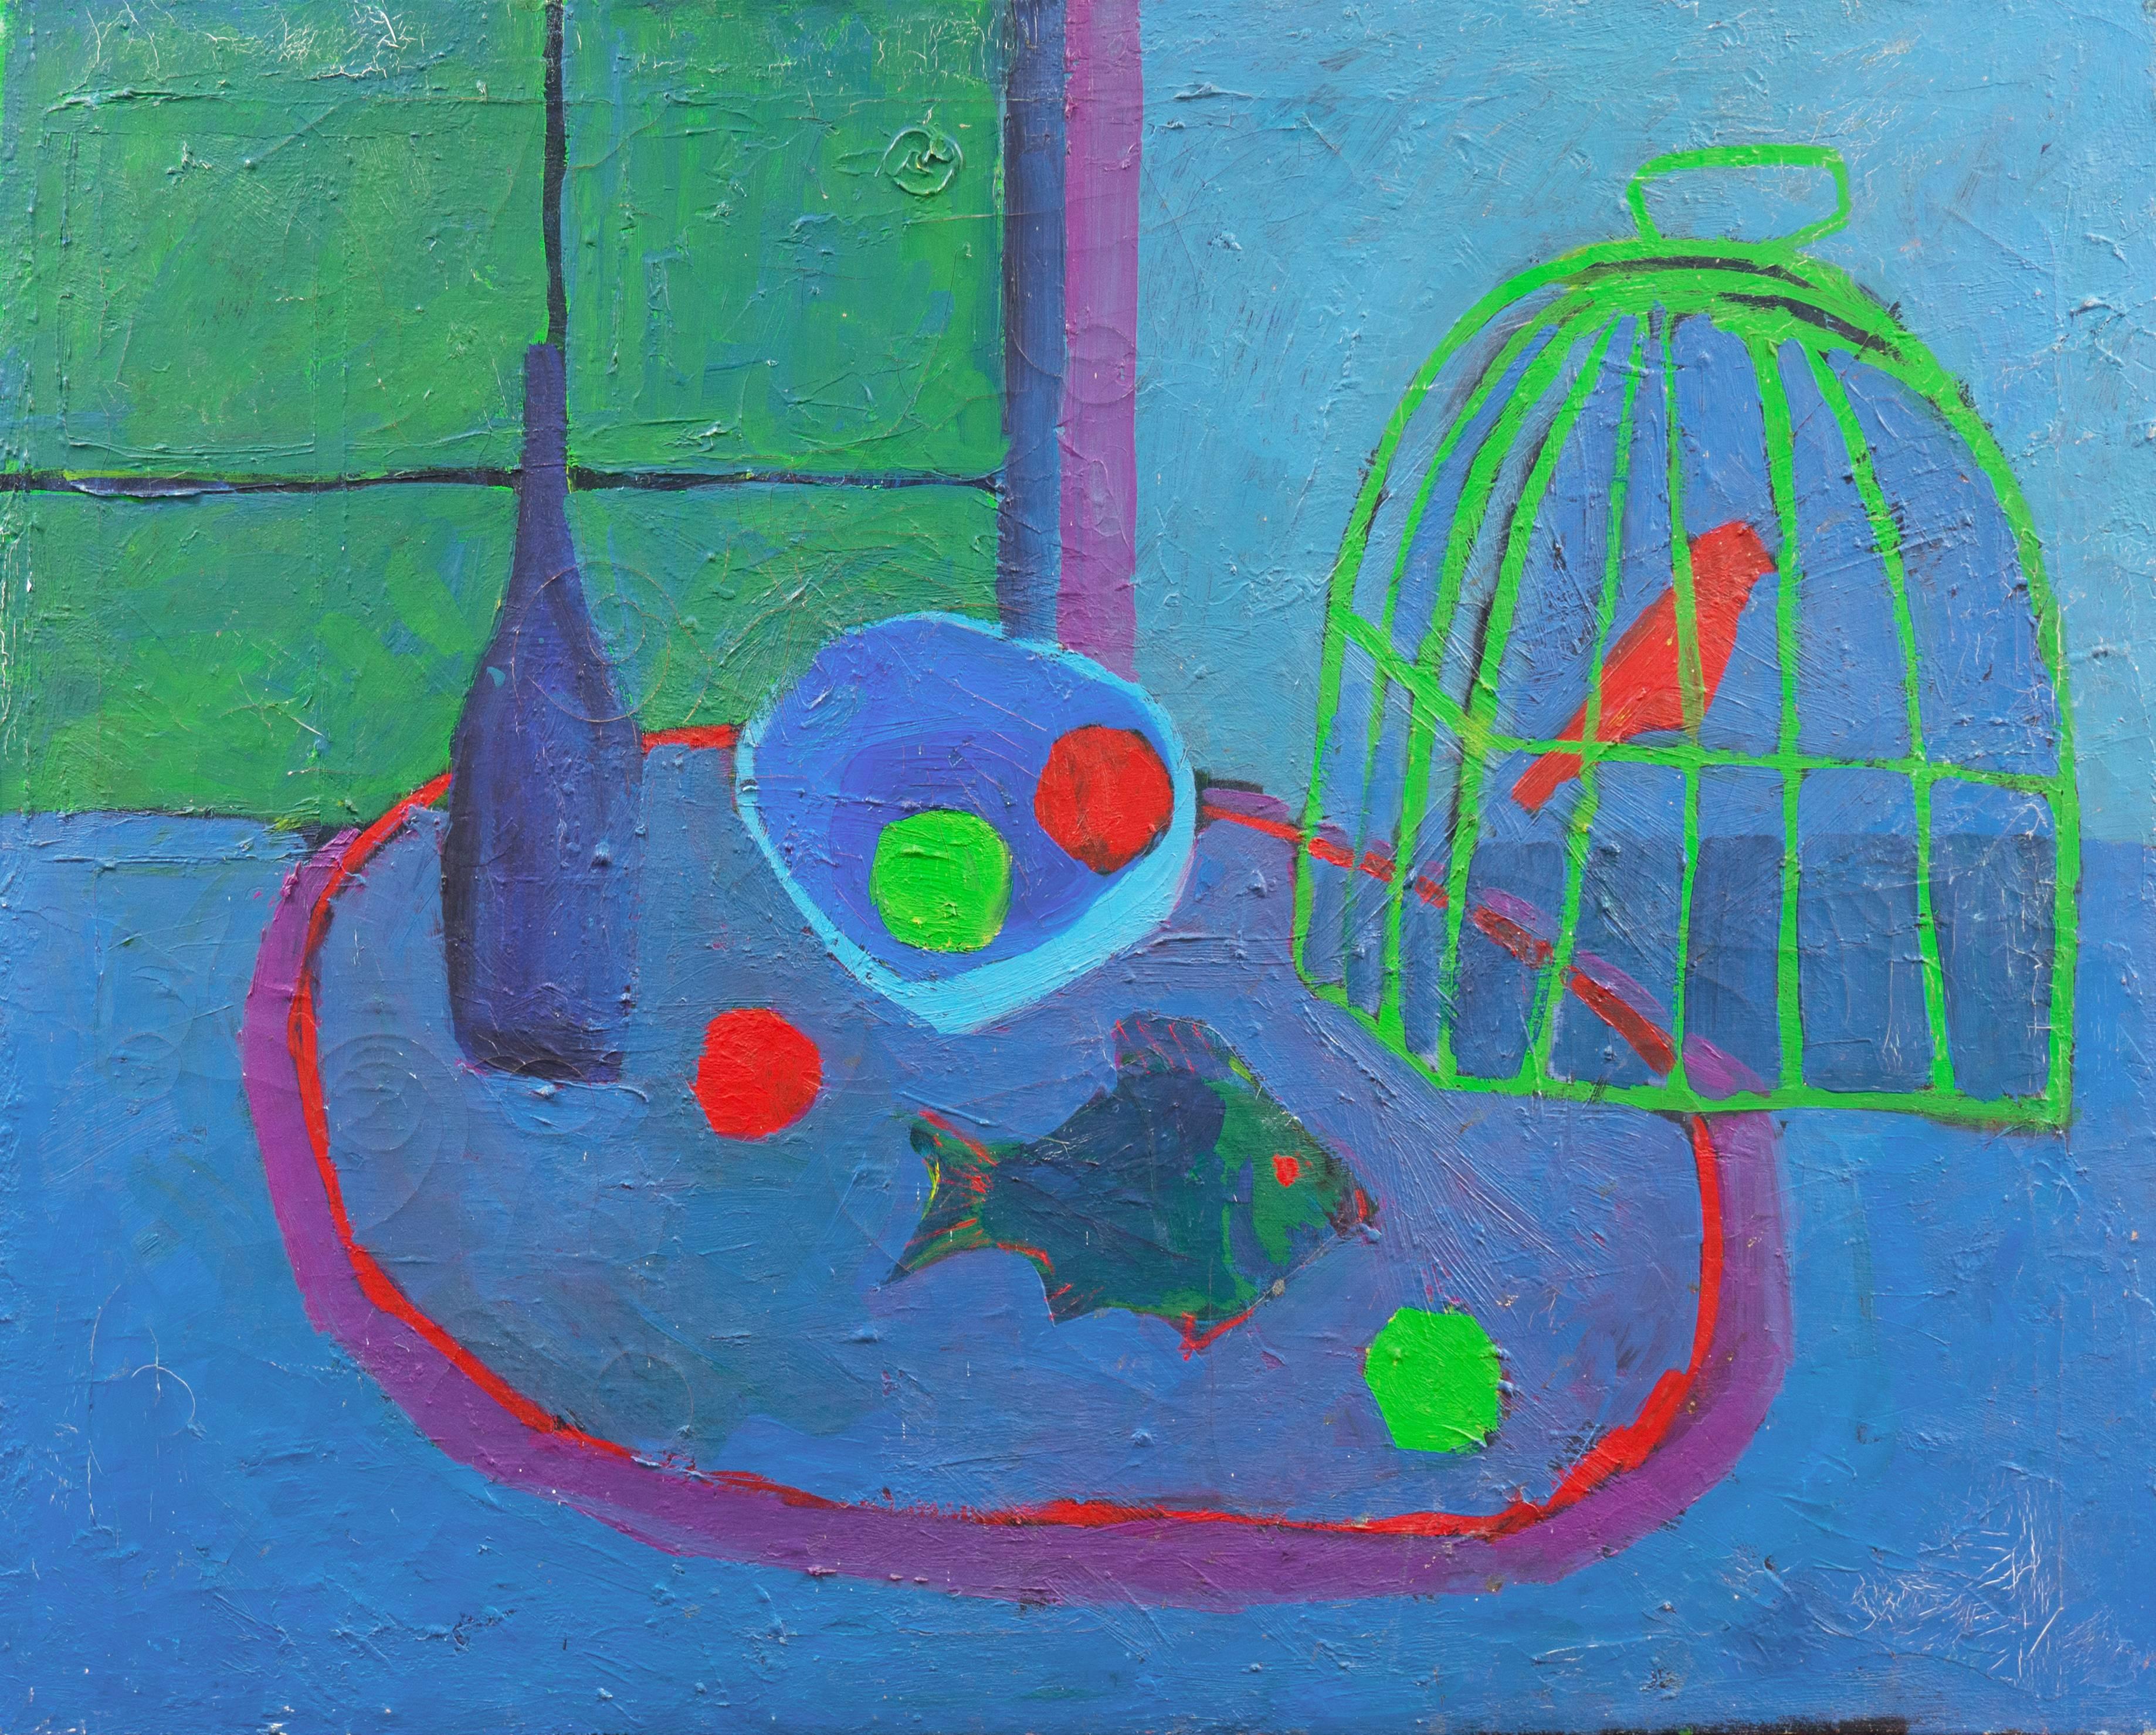 Unknown Interior Painting - 'Still Life with Songbird', American Modernist, Blue Interior